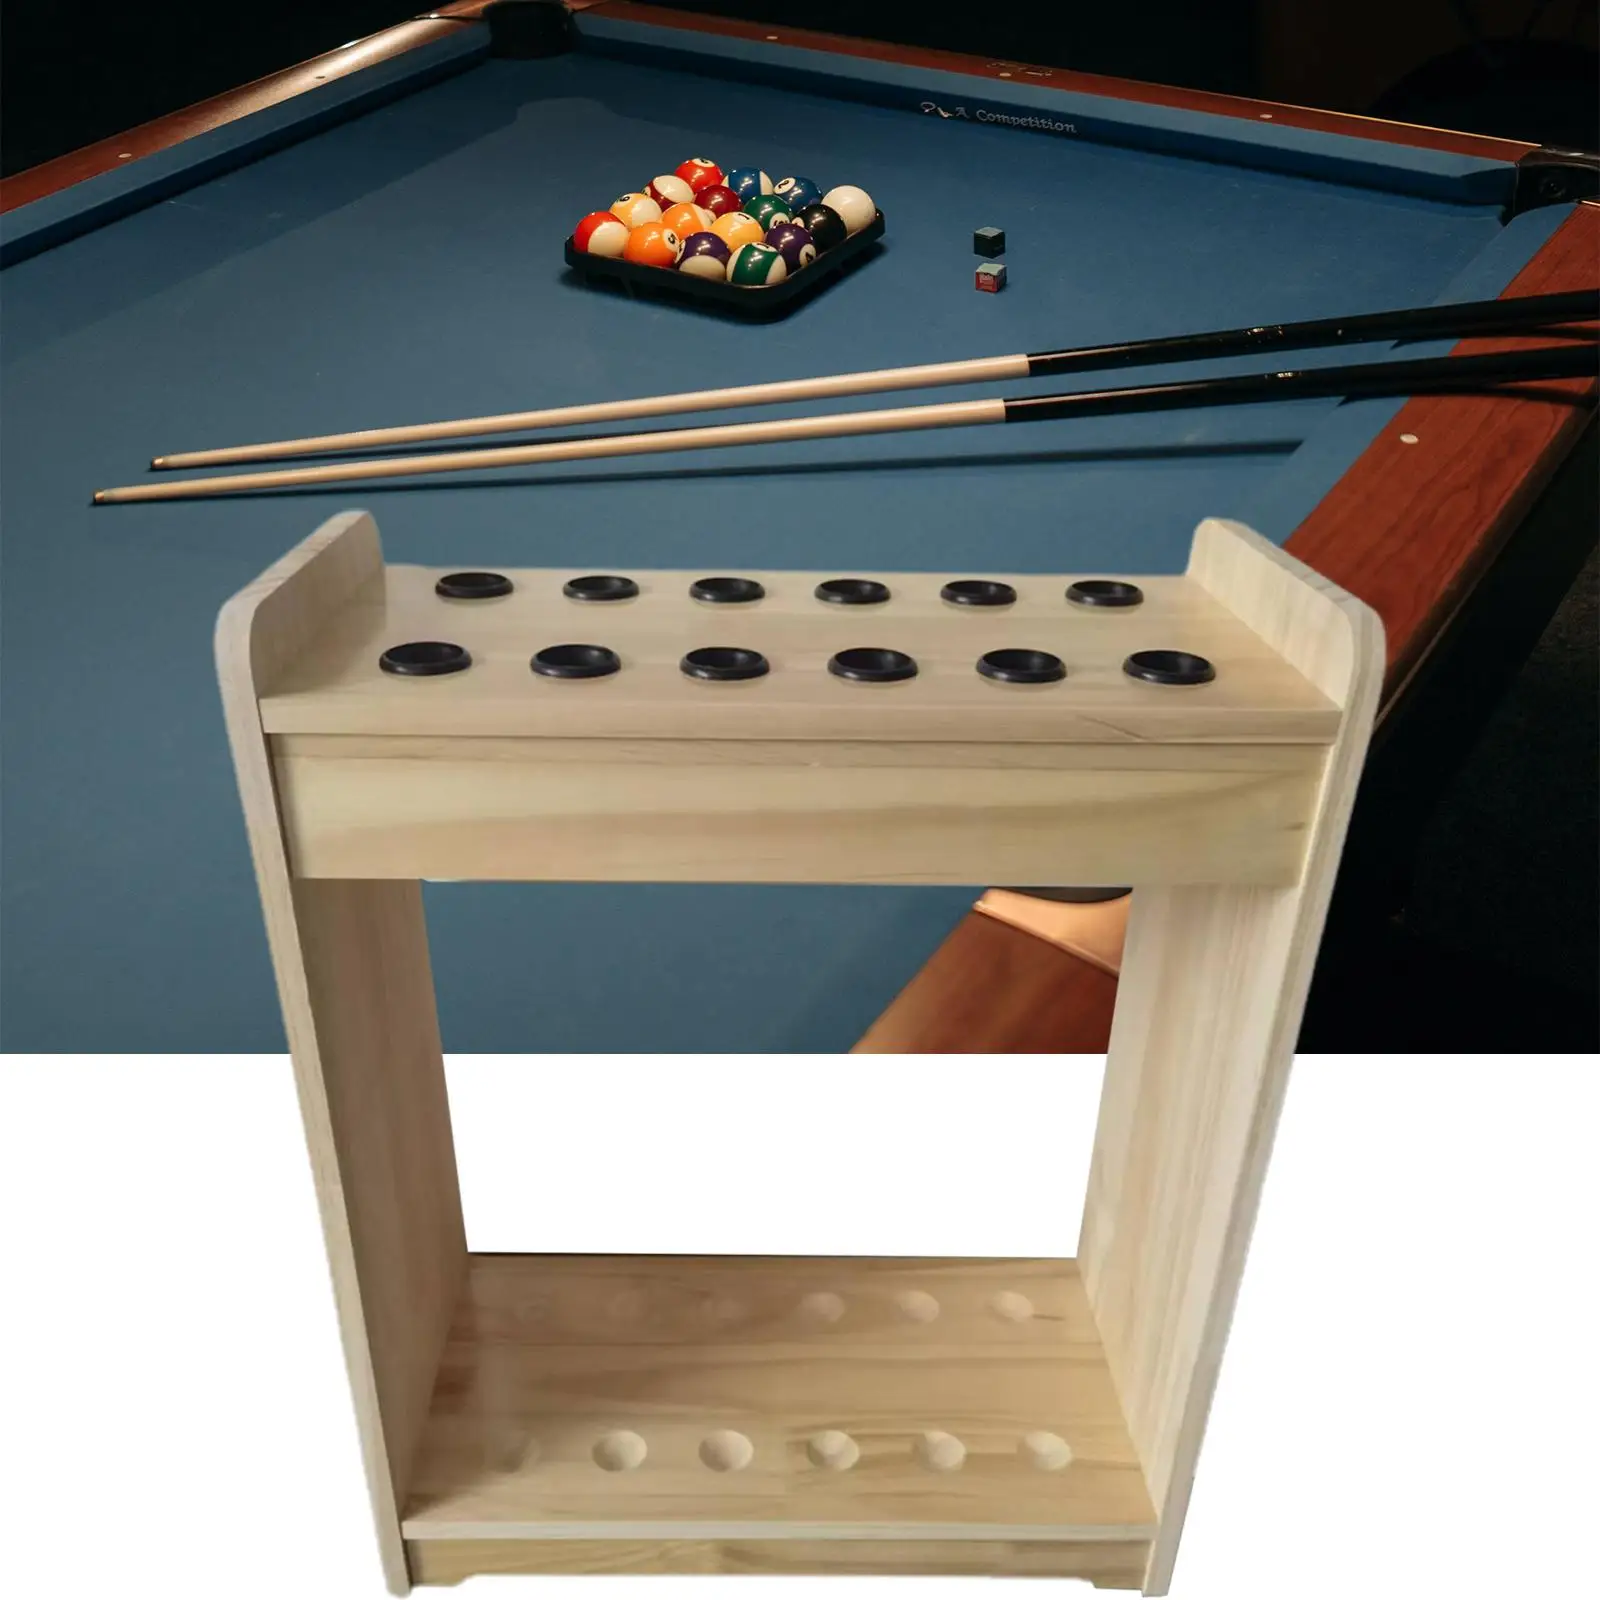 Portable Stick Rack 12 Holes Vertical Wooden Pool Table for Gaming Room Rod Organizer